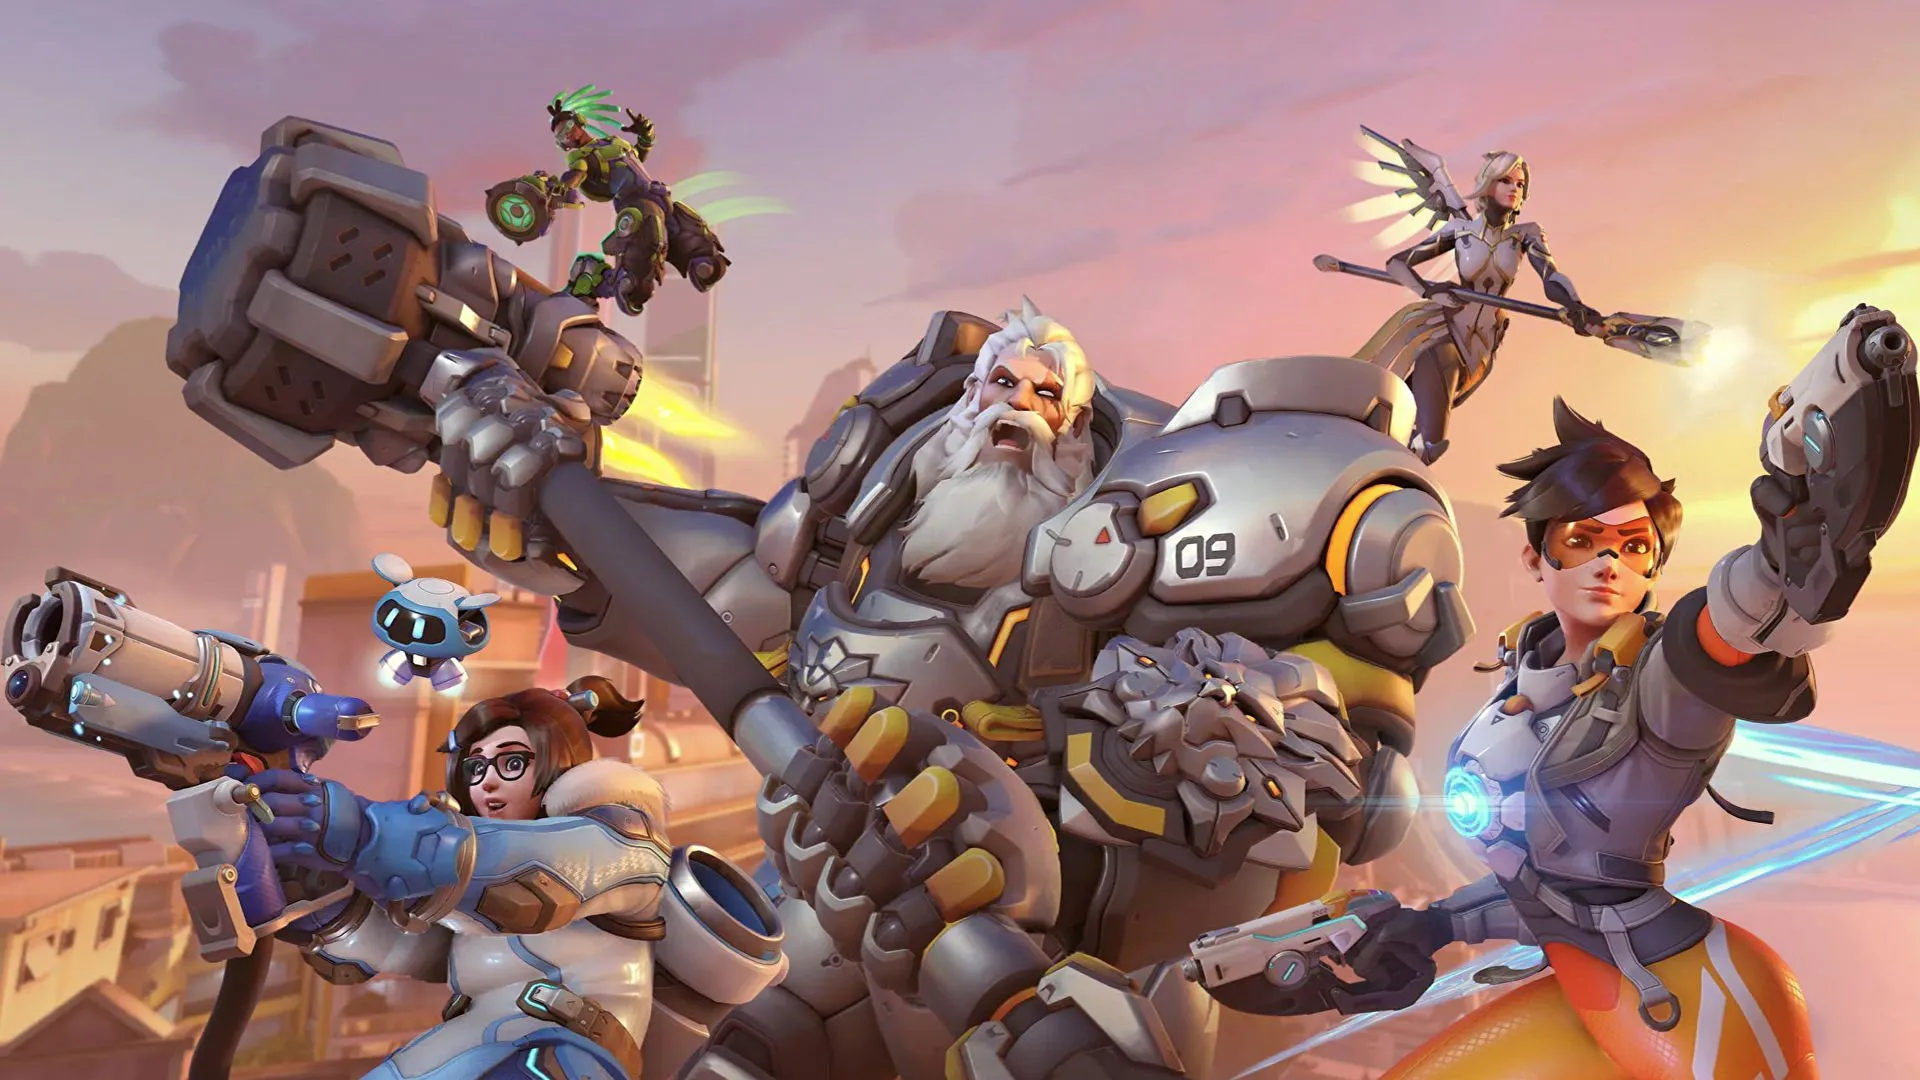 Blizzard considering adding more Overwatch characters to Heroes of